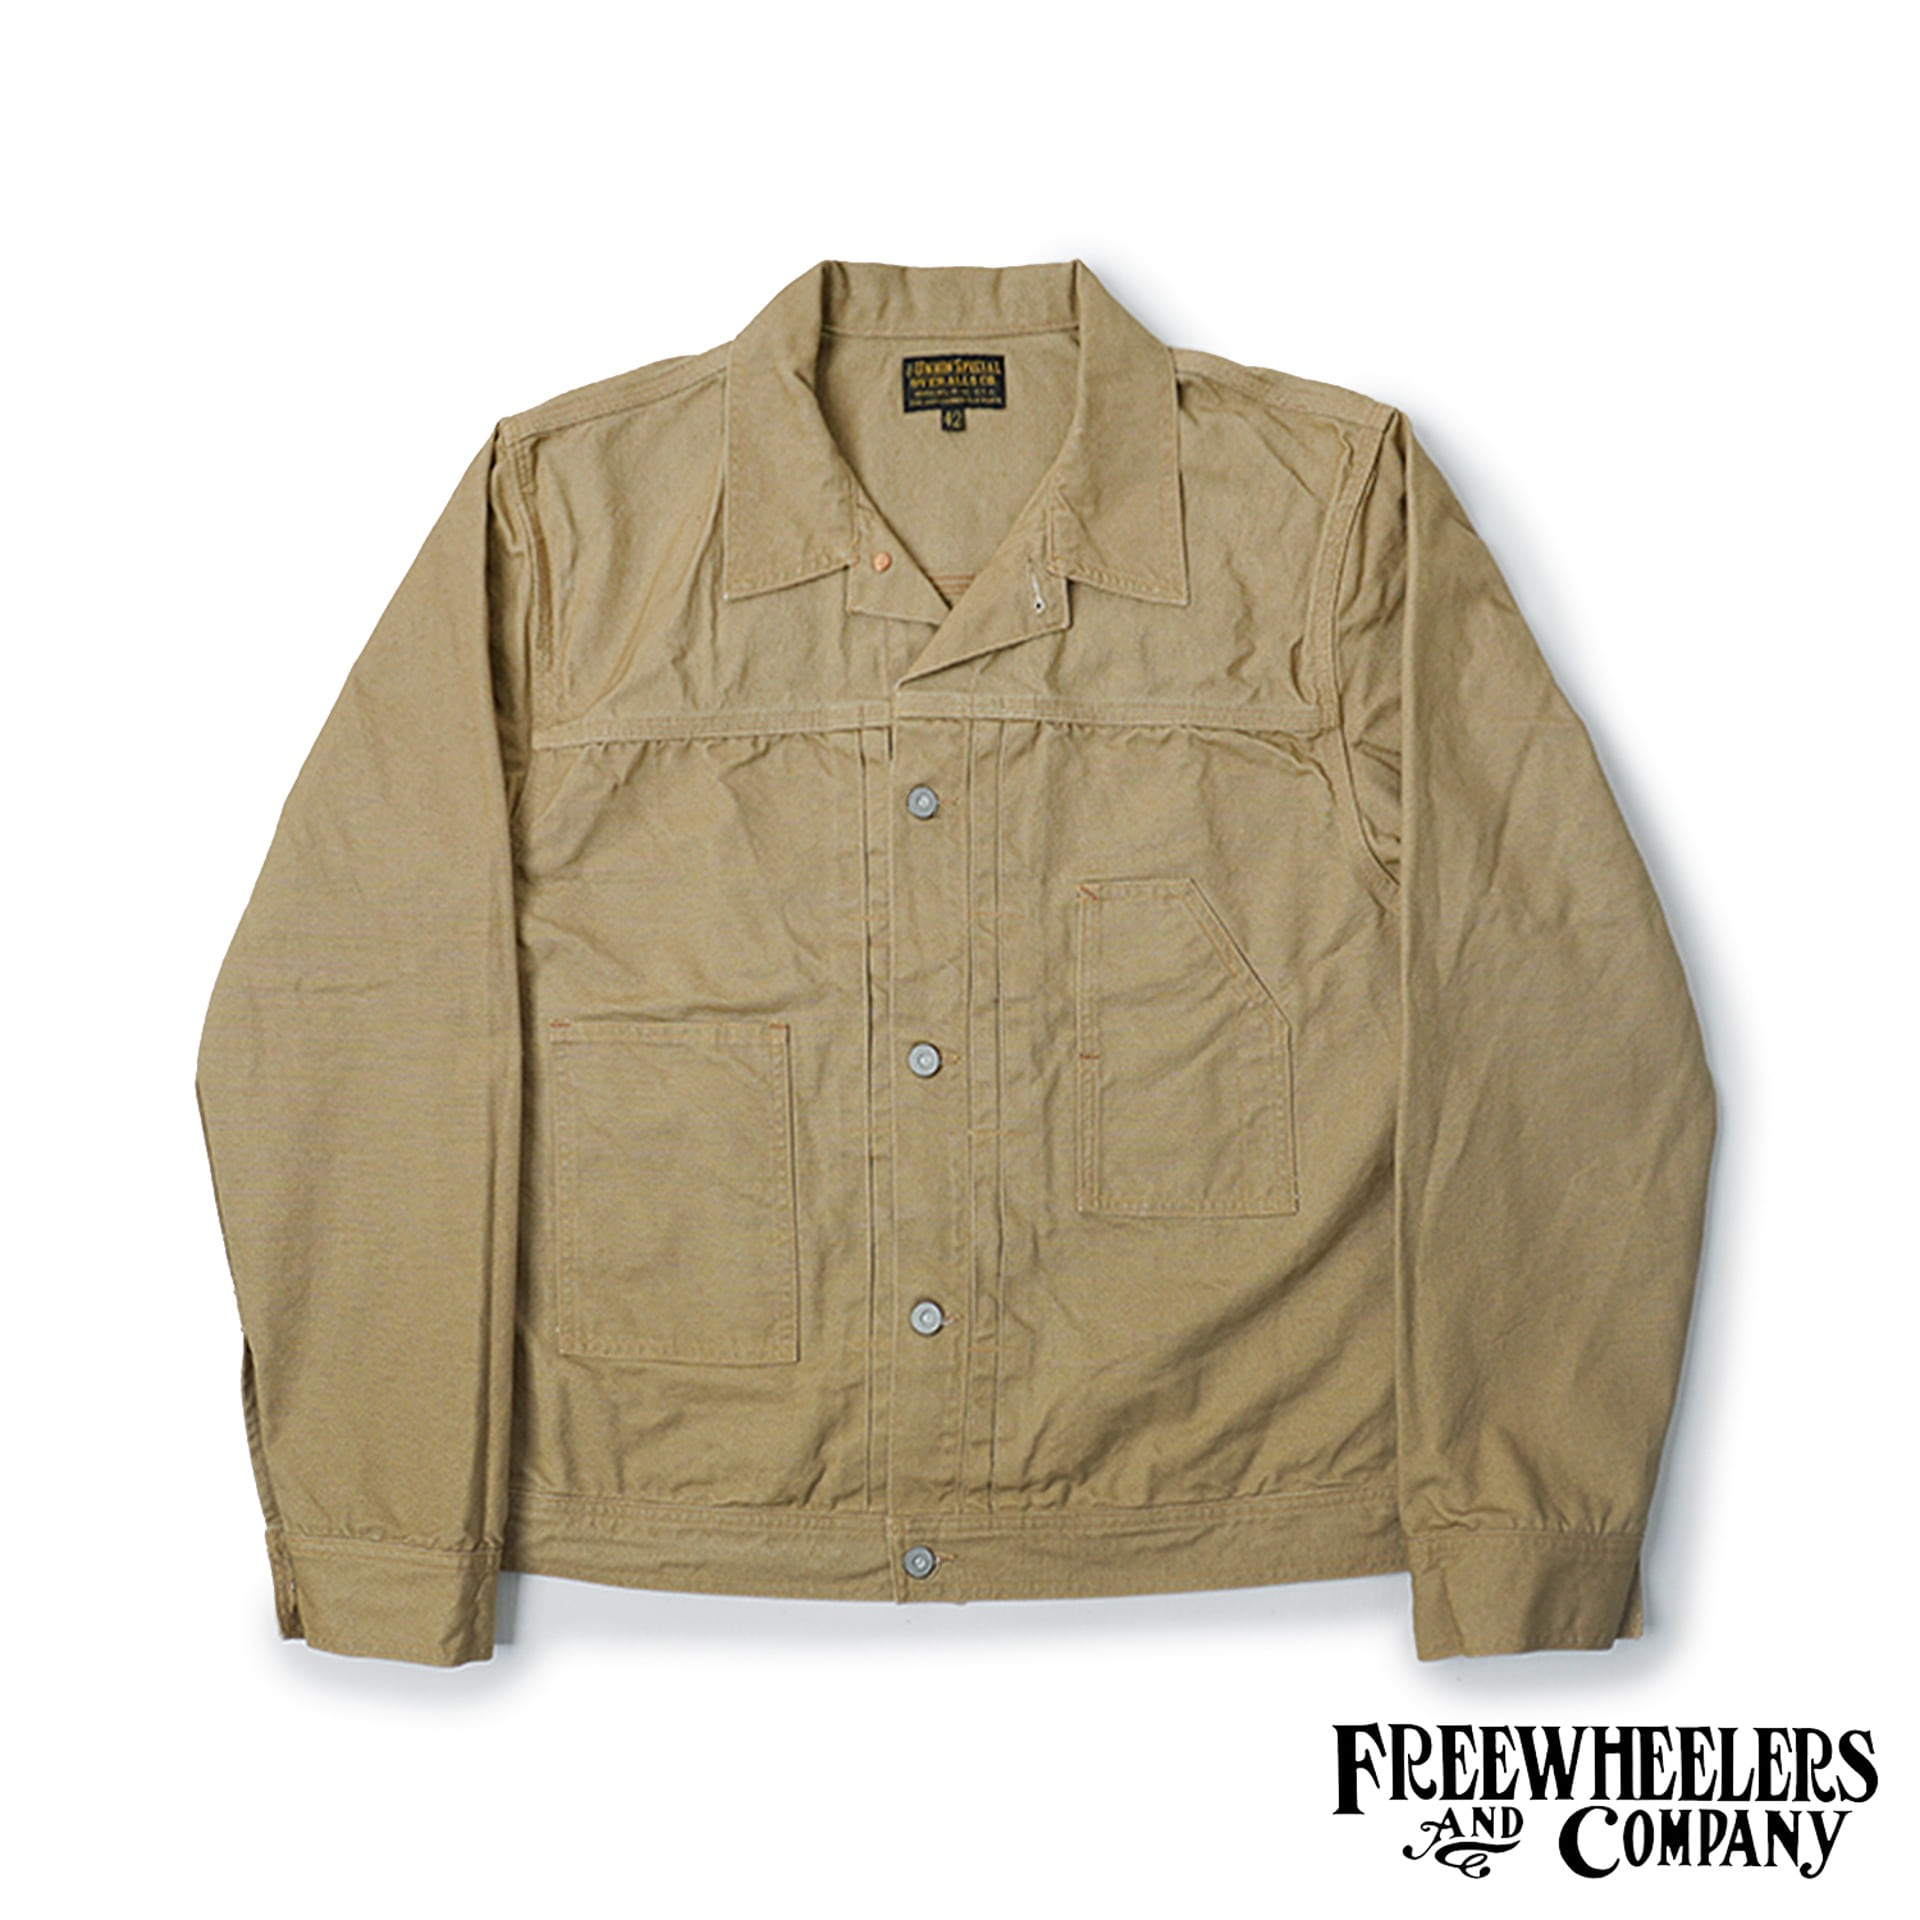 [UNION SPECIAL OVERALLS] 1920s STYLE WORK CLOTHING&quot;GLAZIER&quot; WORK JACKET(Yellow Brown)